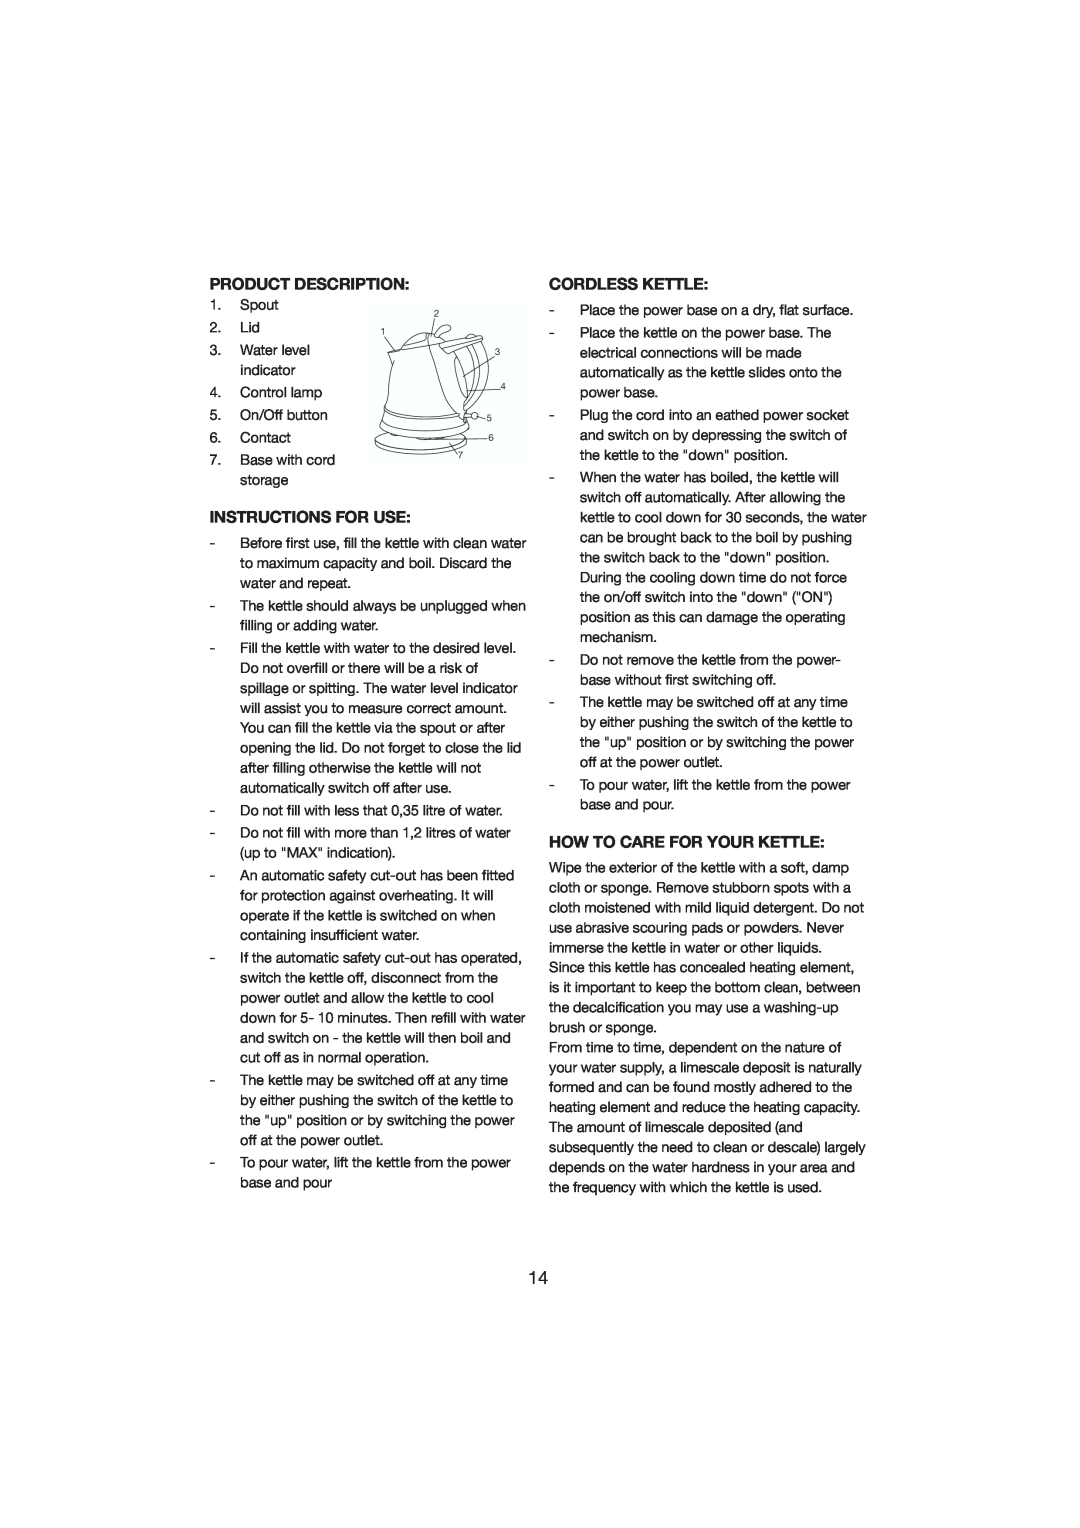 Melissa 245-018 manual Product Description, Instructions For Use, Cordless Kettle, How To Care For Your Kettle 